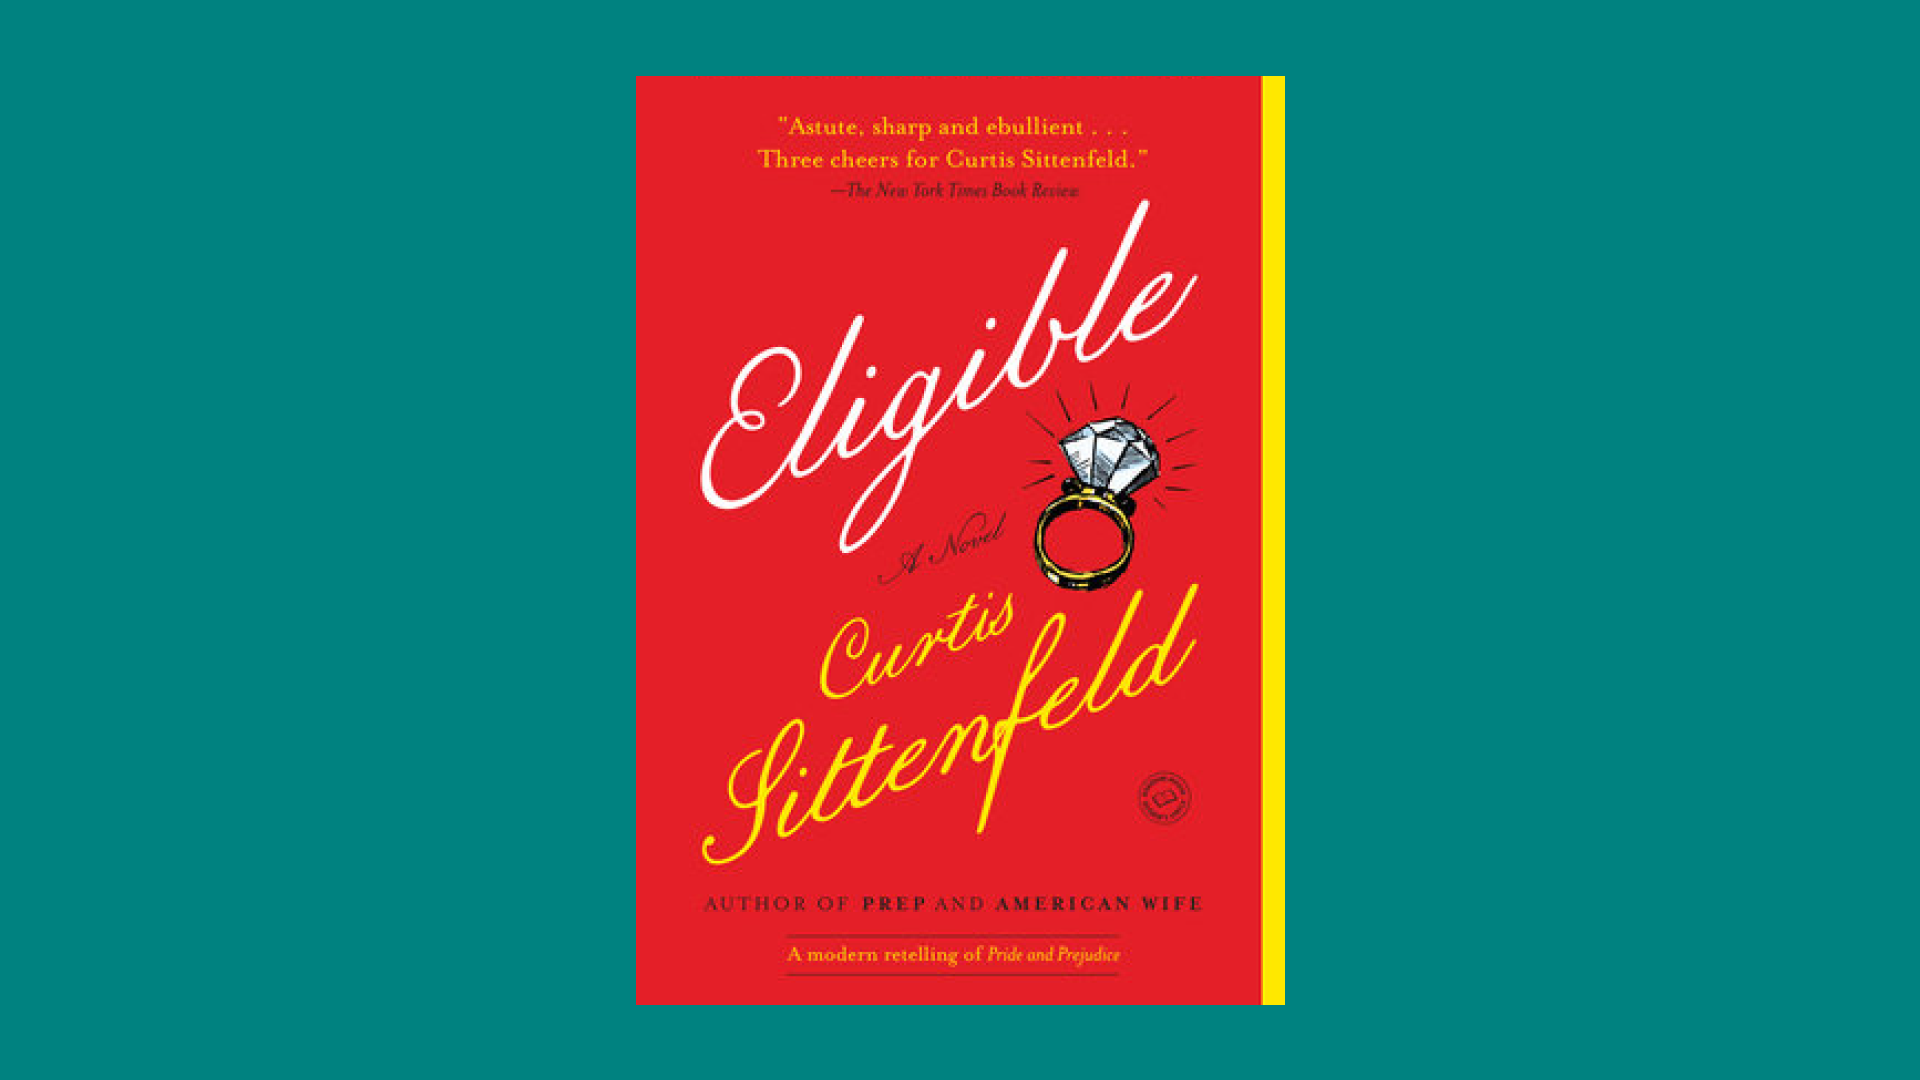 “Eligible” by Curtis Sittenfeld